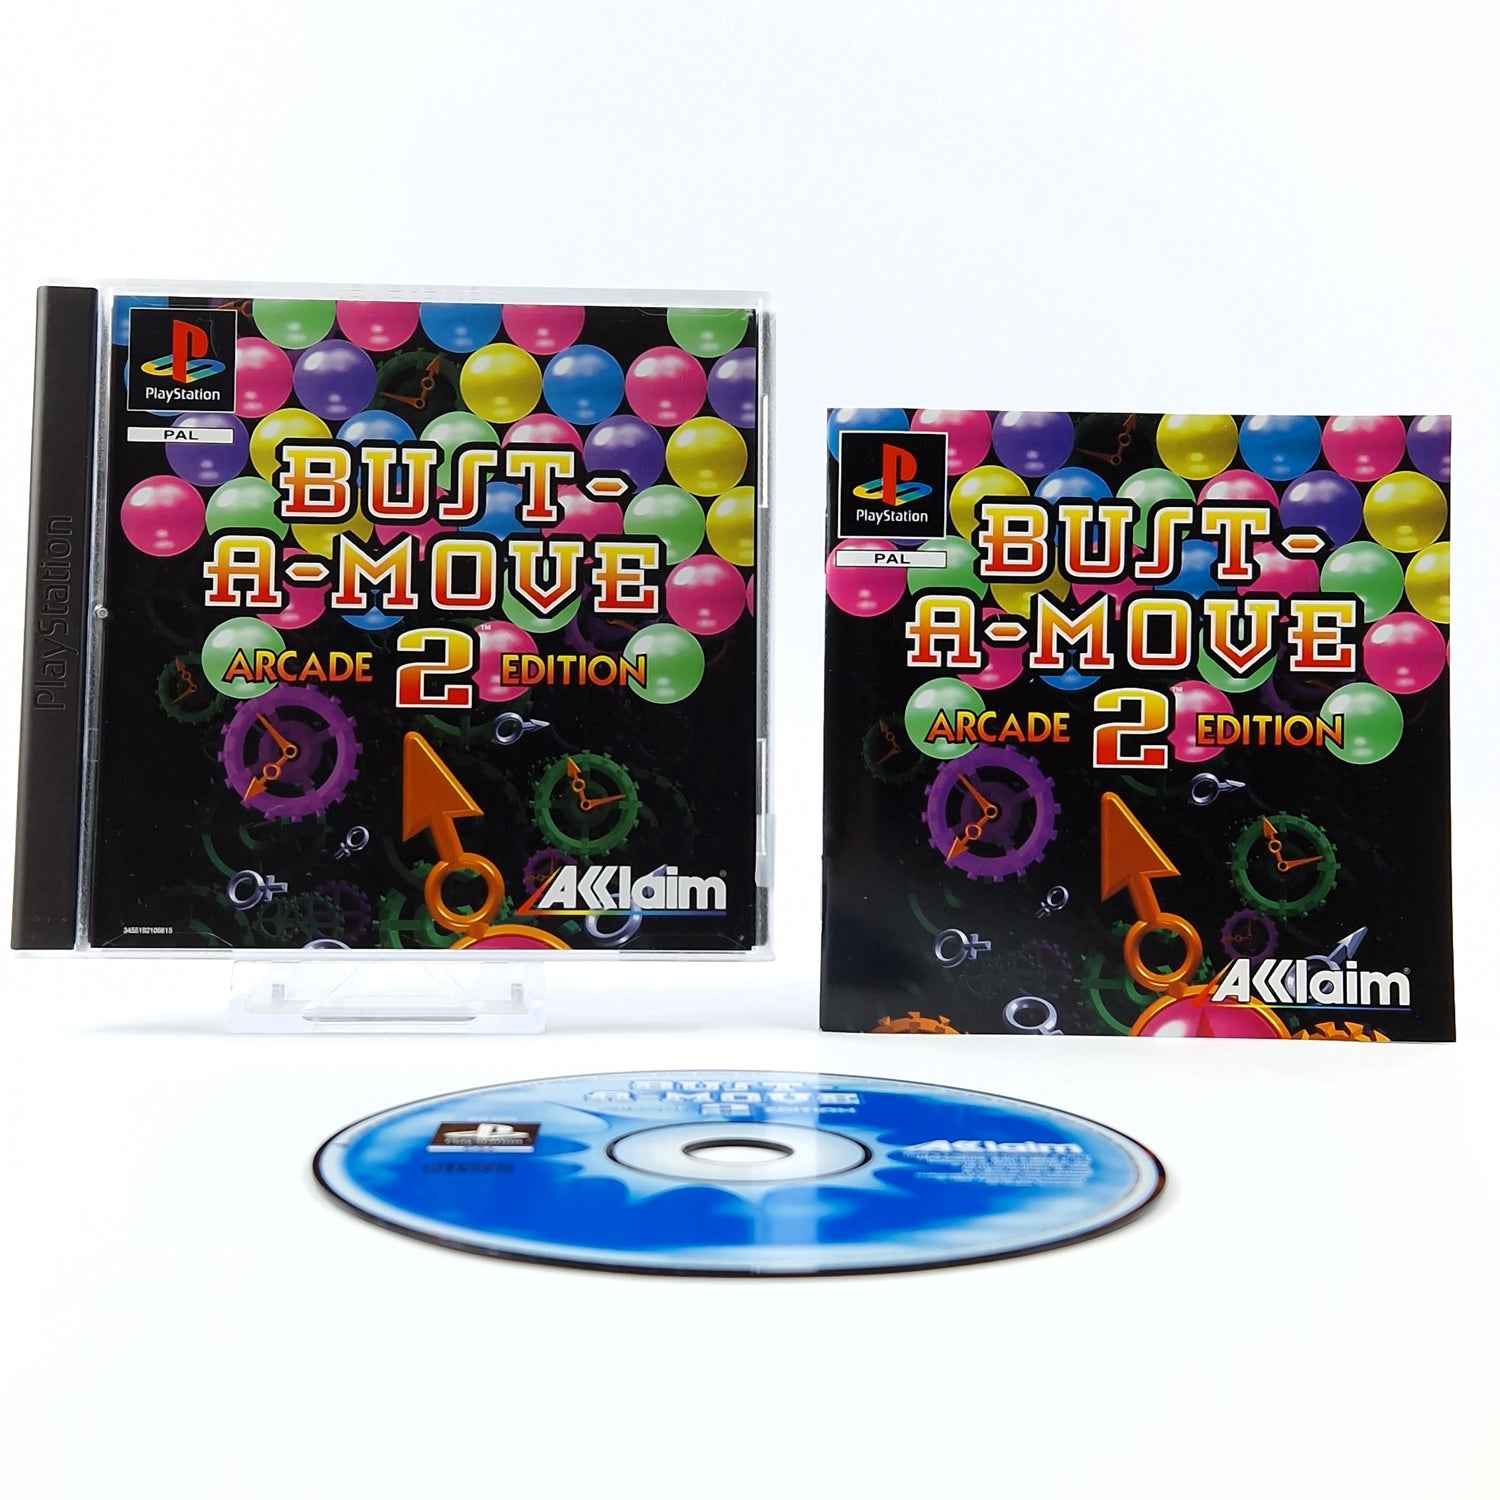 Playstation 1 game: Bust-A-Move 2 Arcade Edition CD instructions OVP SONY PS1 PSX